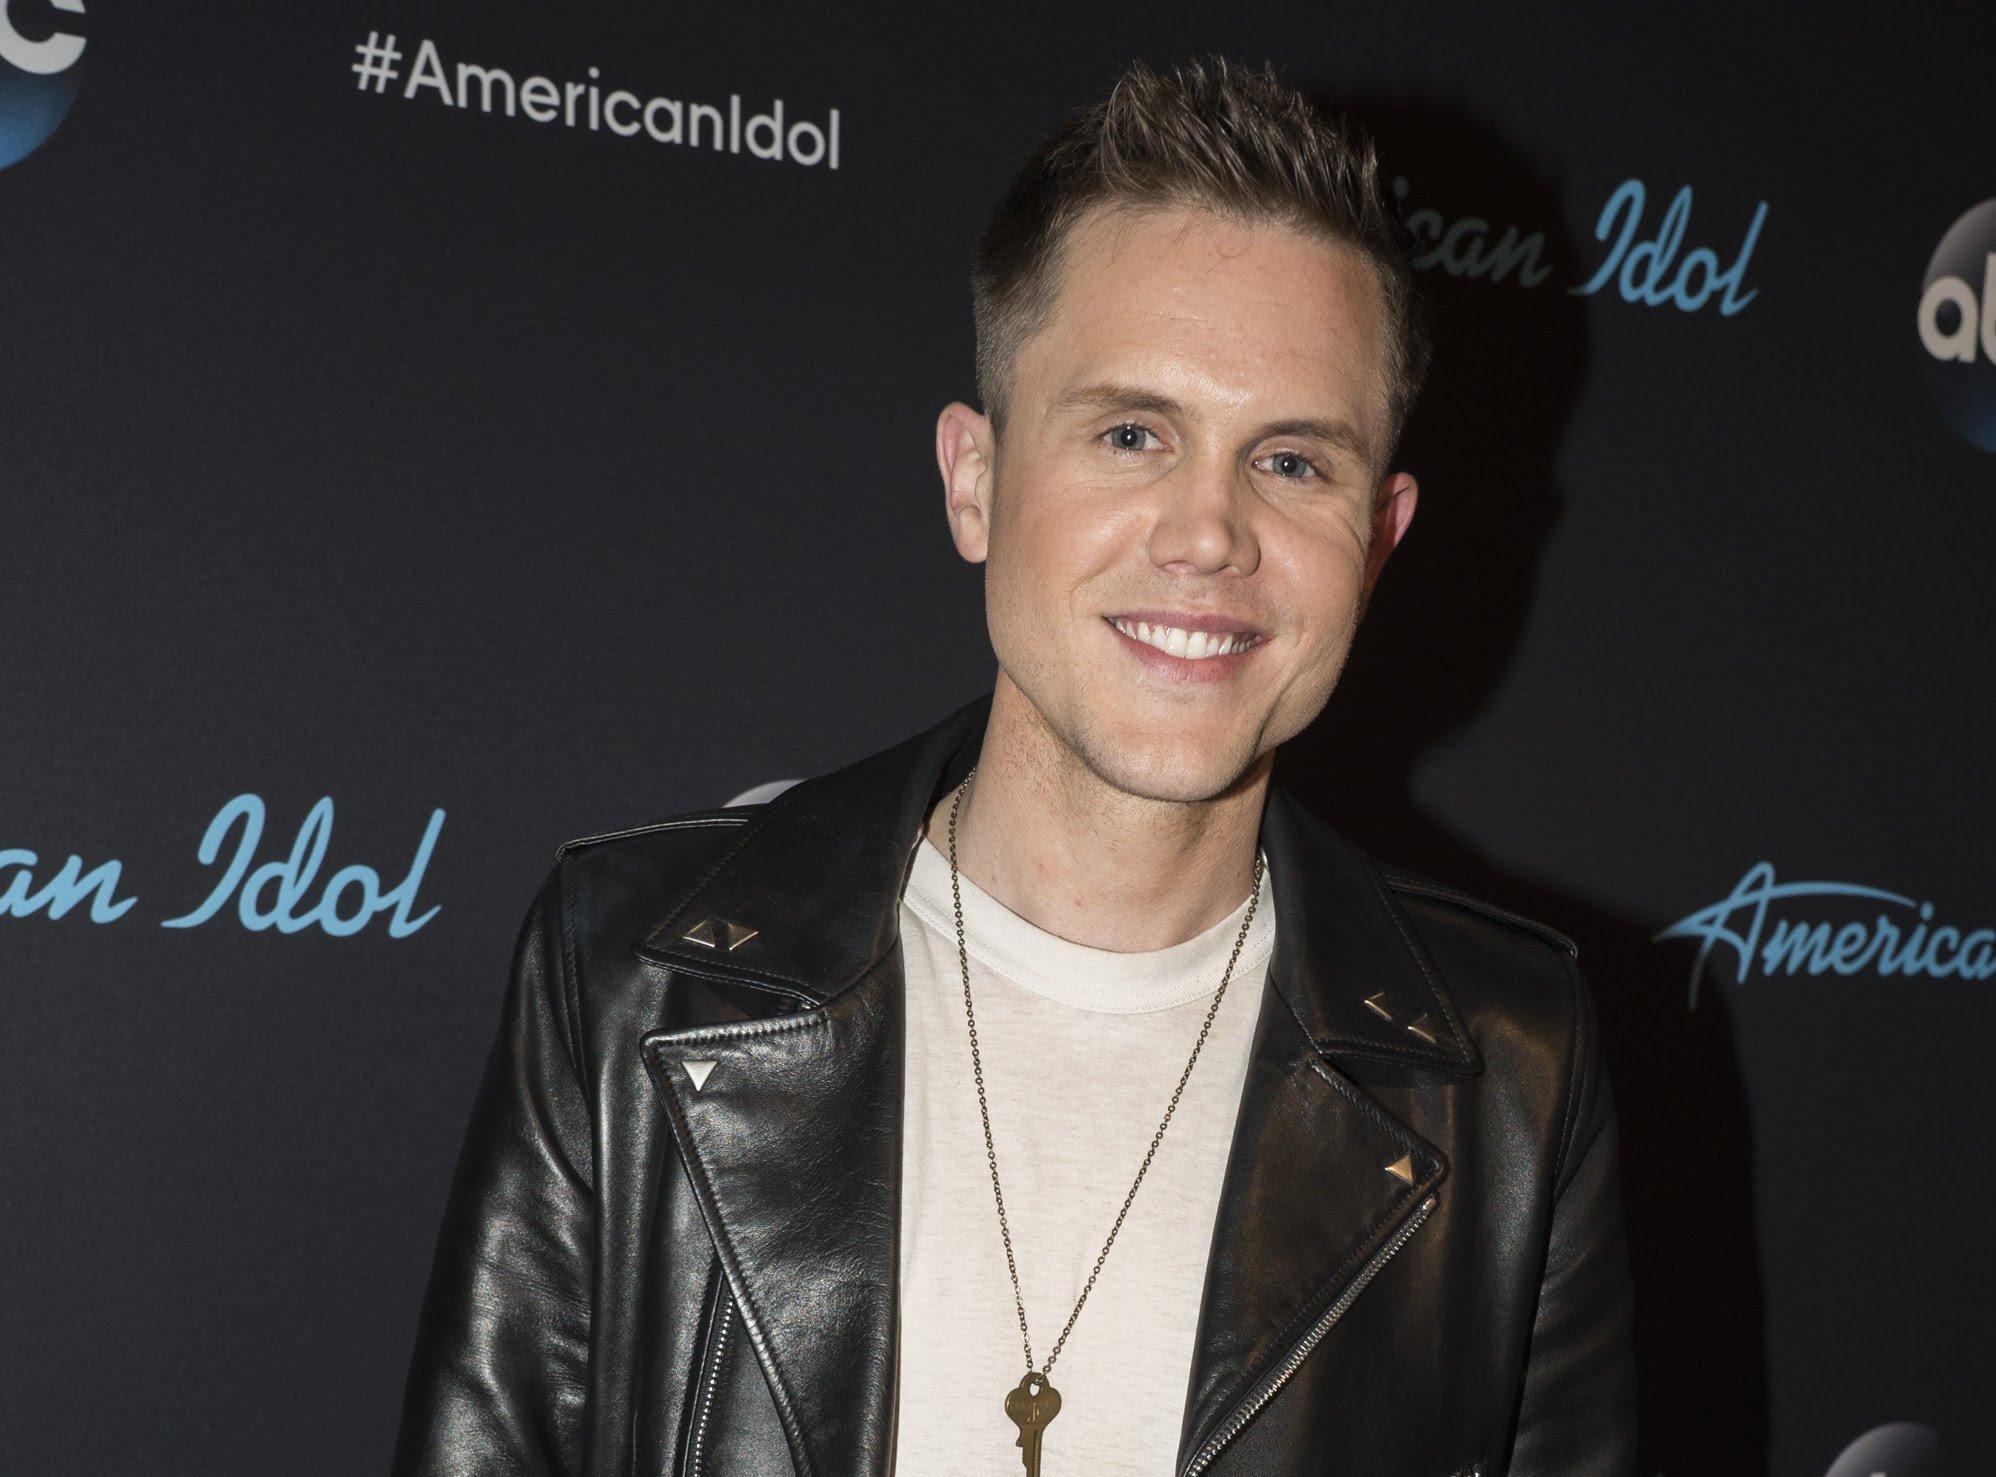 Trent Harmon Delivers Powerful Acoustic Performance of Song “On Paper” – Watch Now